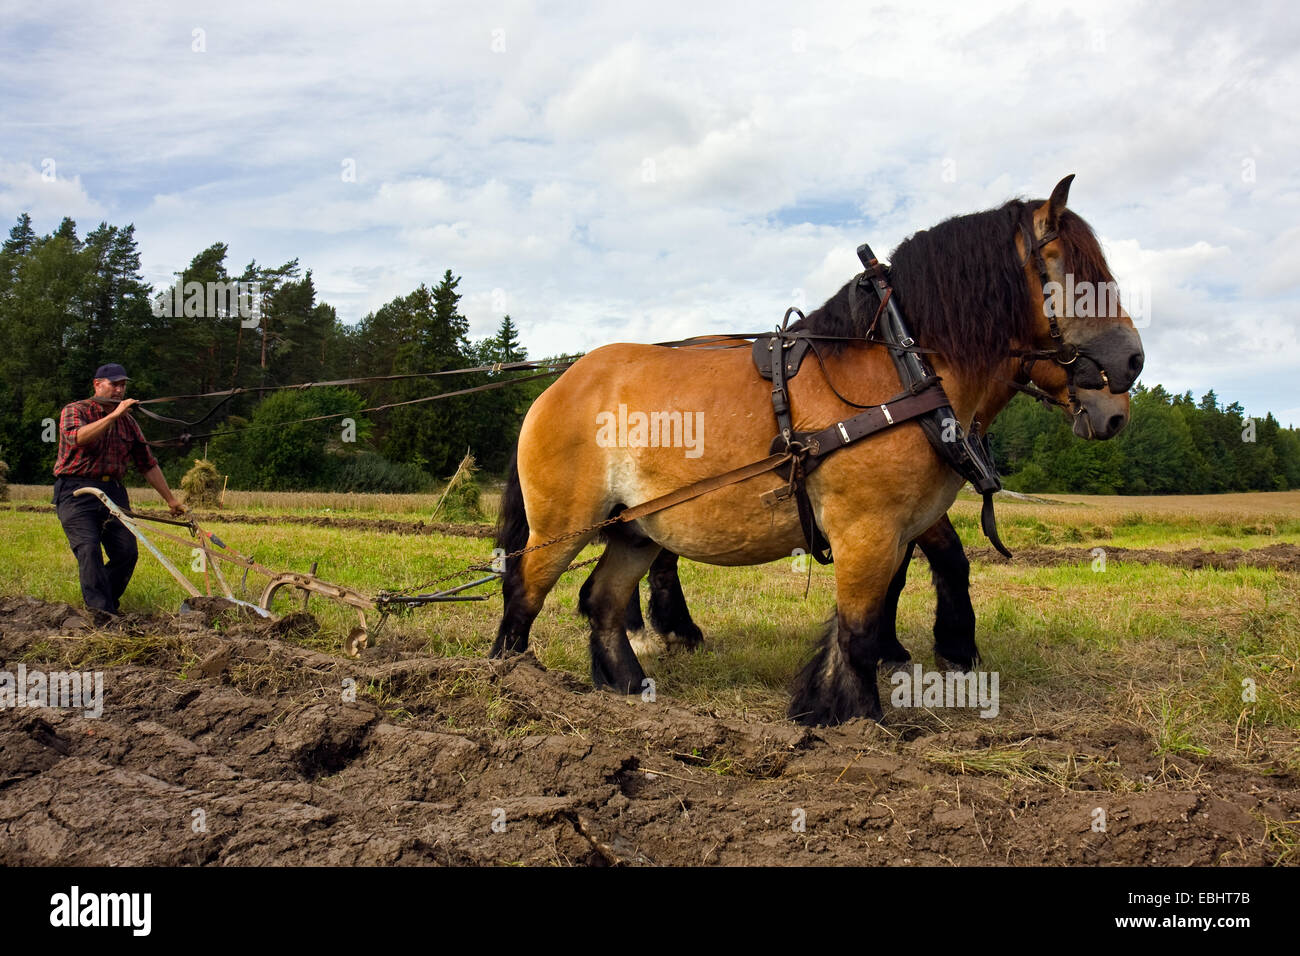 Ploughing a field in the old fashioned way in Sweden, using horses strapped to a plough. Stock Photo